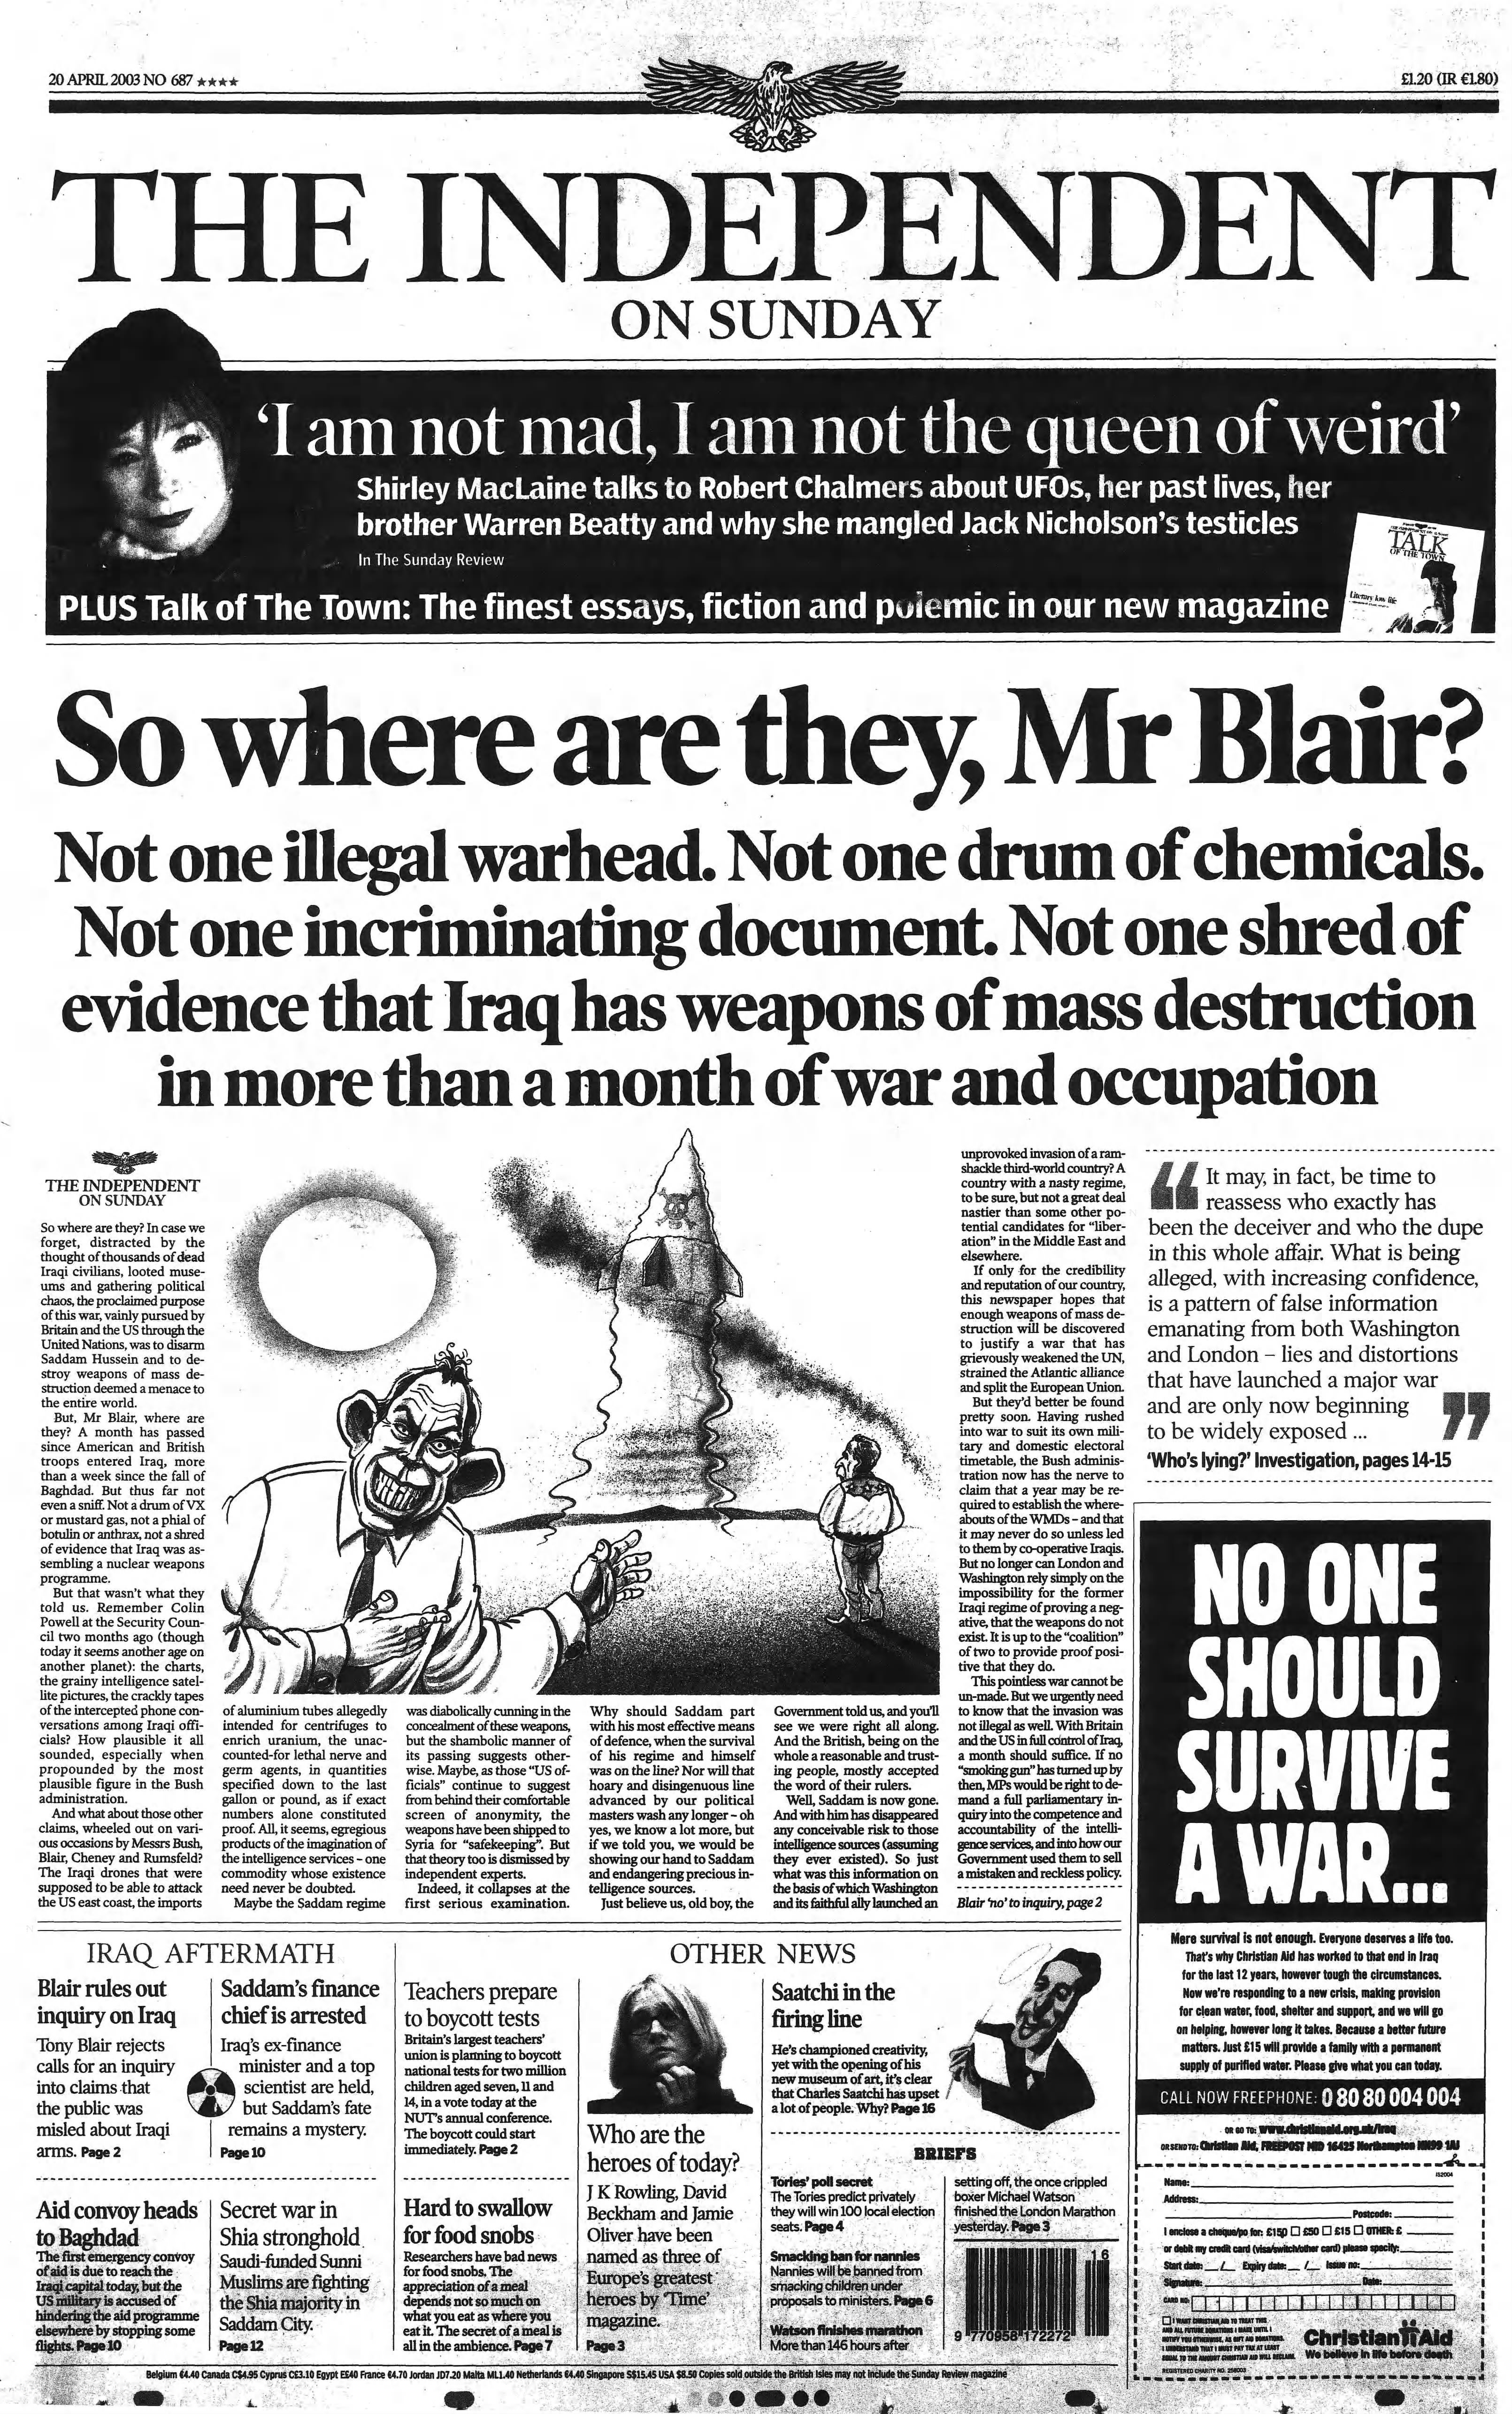 The Independent front page on 20 April 2003